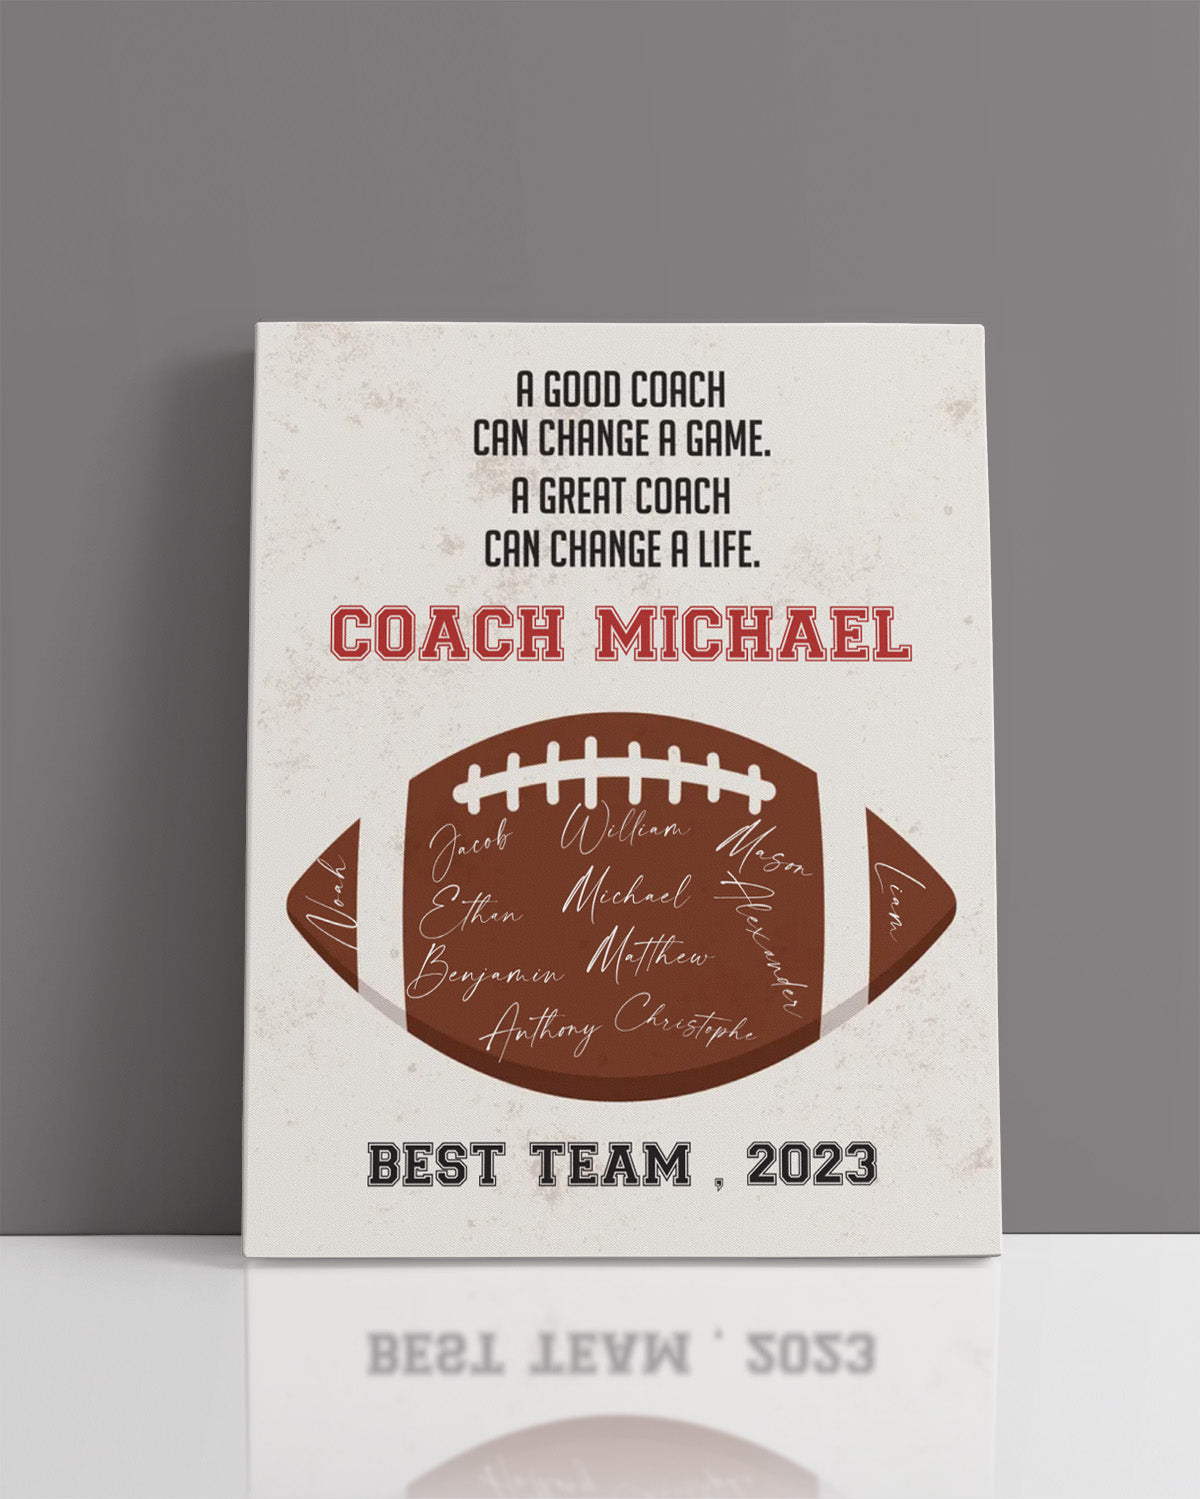 Football Coach Appreciation Gift - Customize Athlete Names, Coach's Names, Team Name, Year or Season - Motivational Sports Wall Art - Coach's Quote